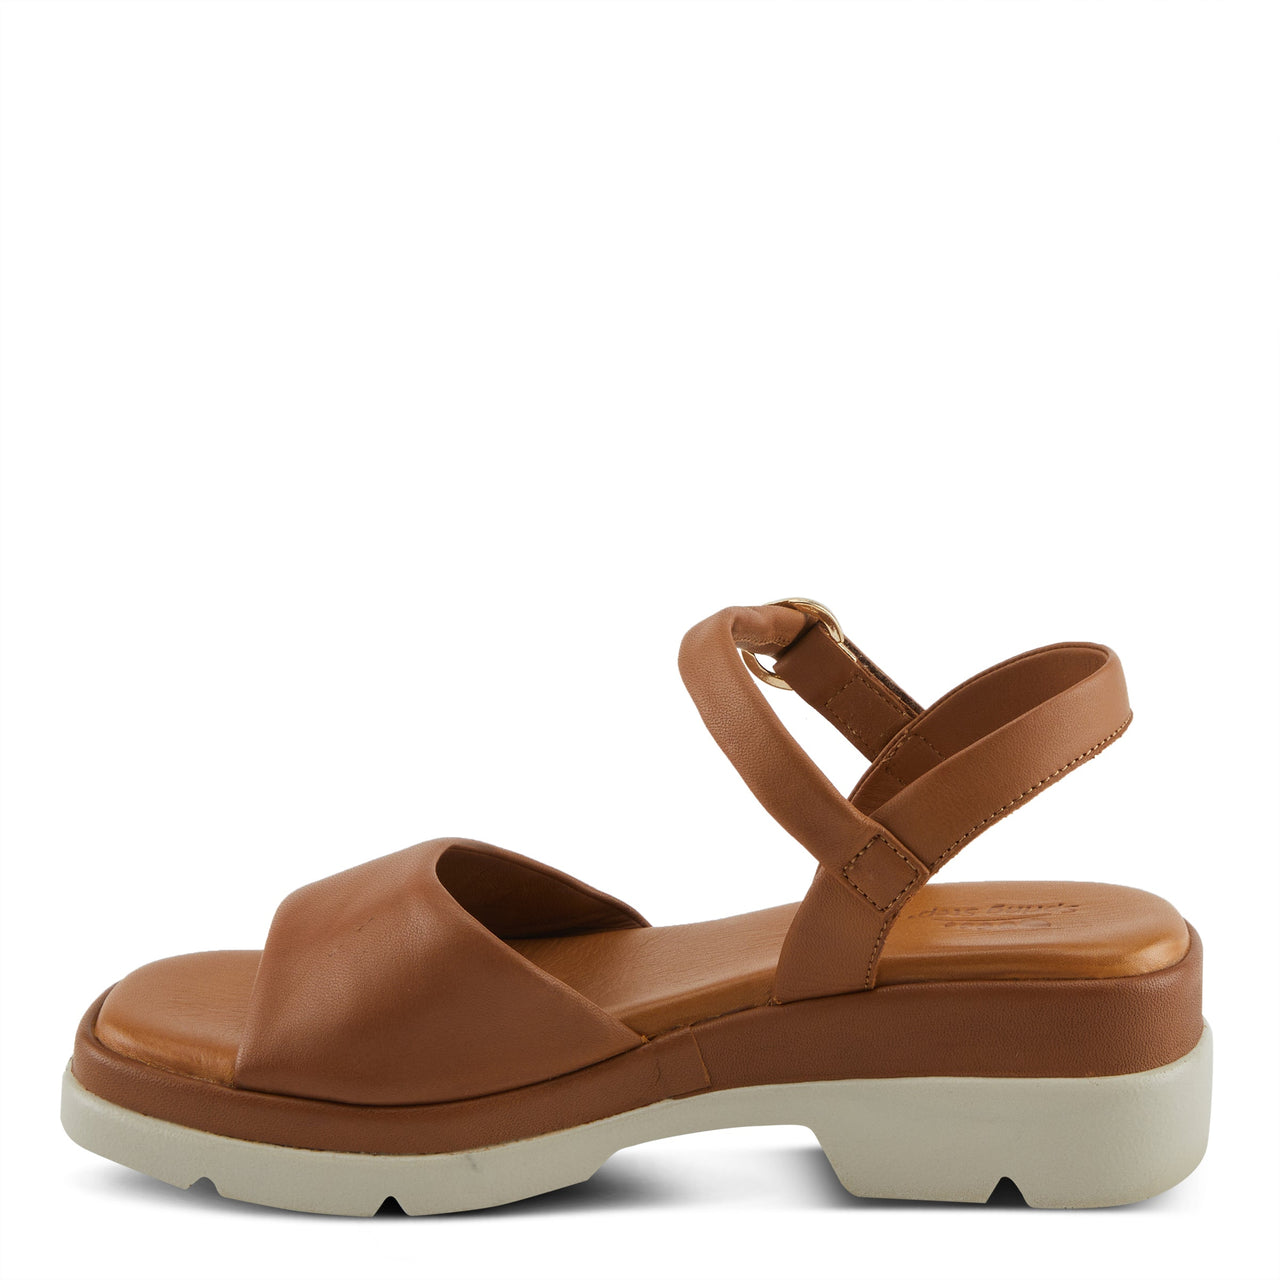 Spring Step Huntington Sandals with peep-toe design for a trendy look